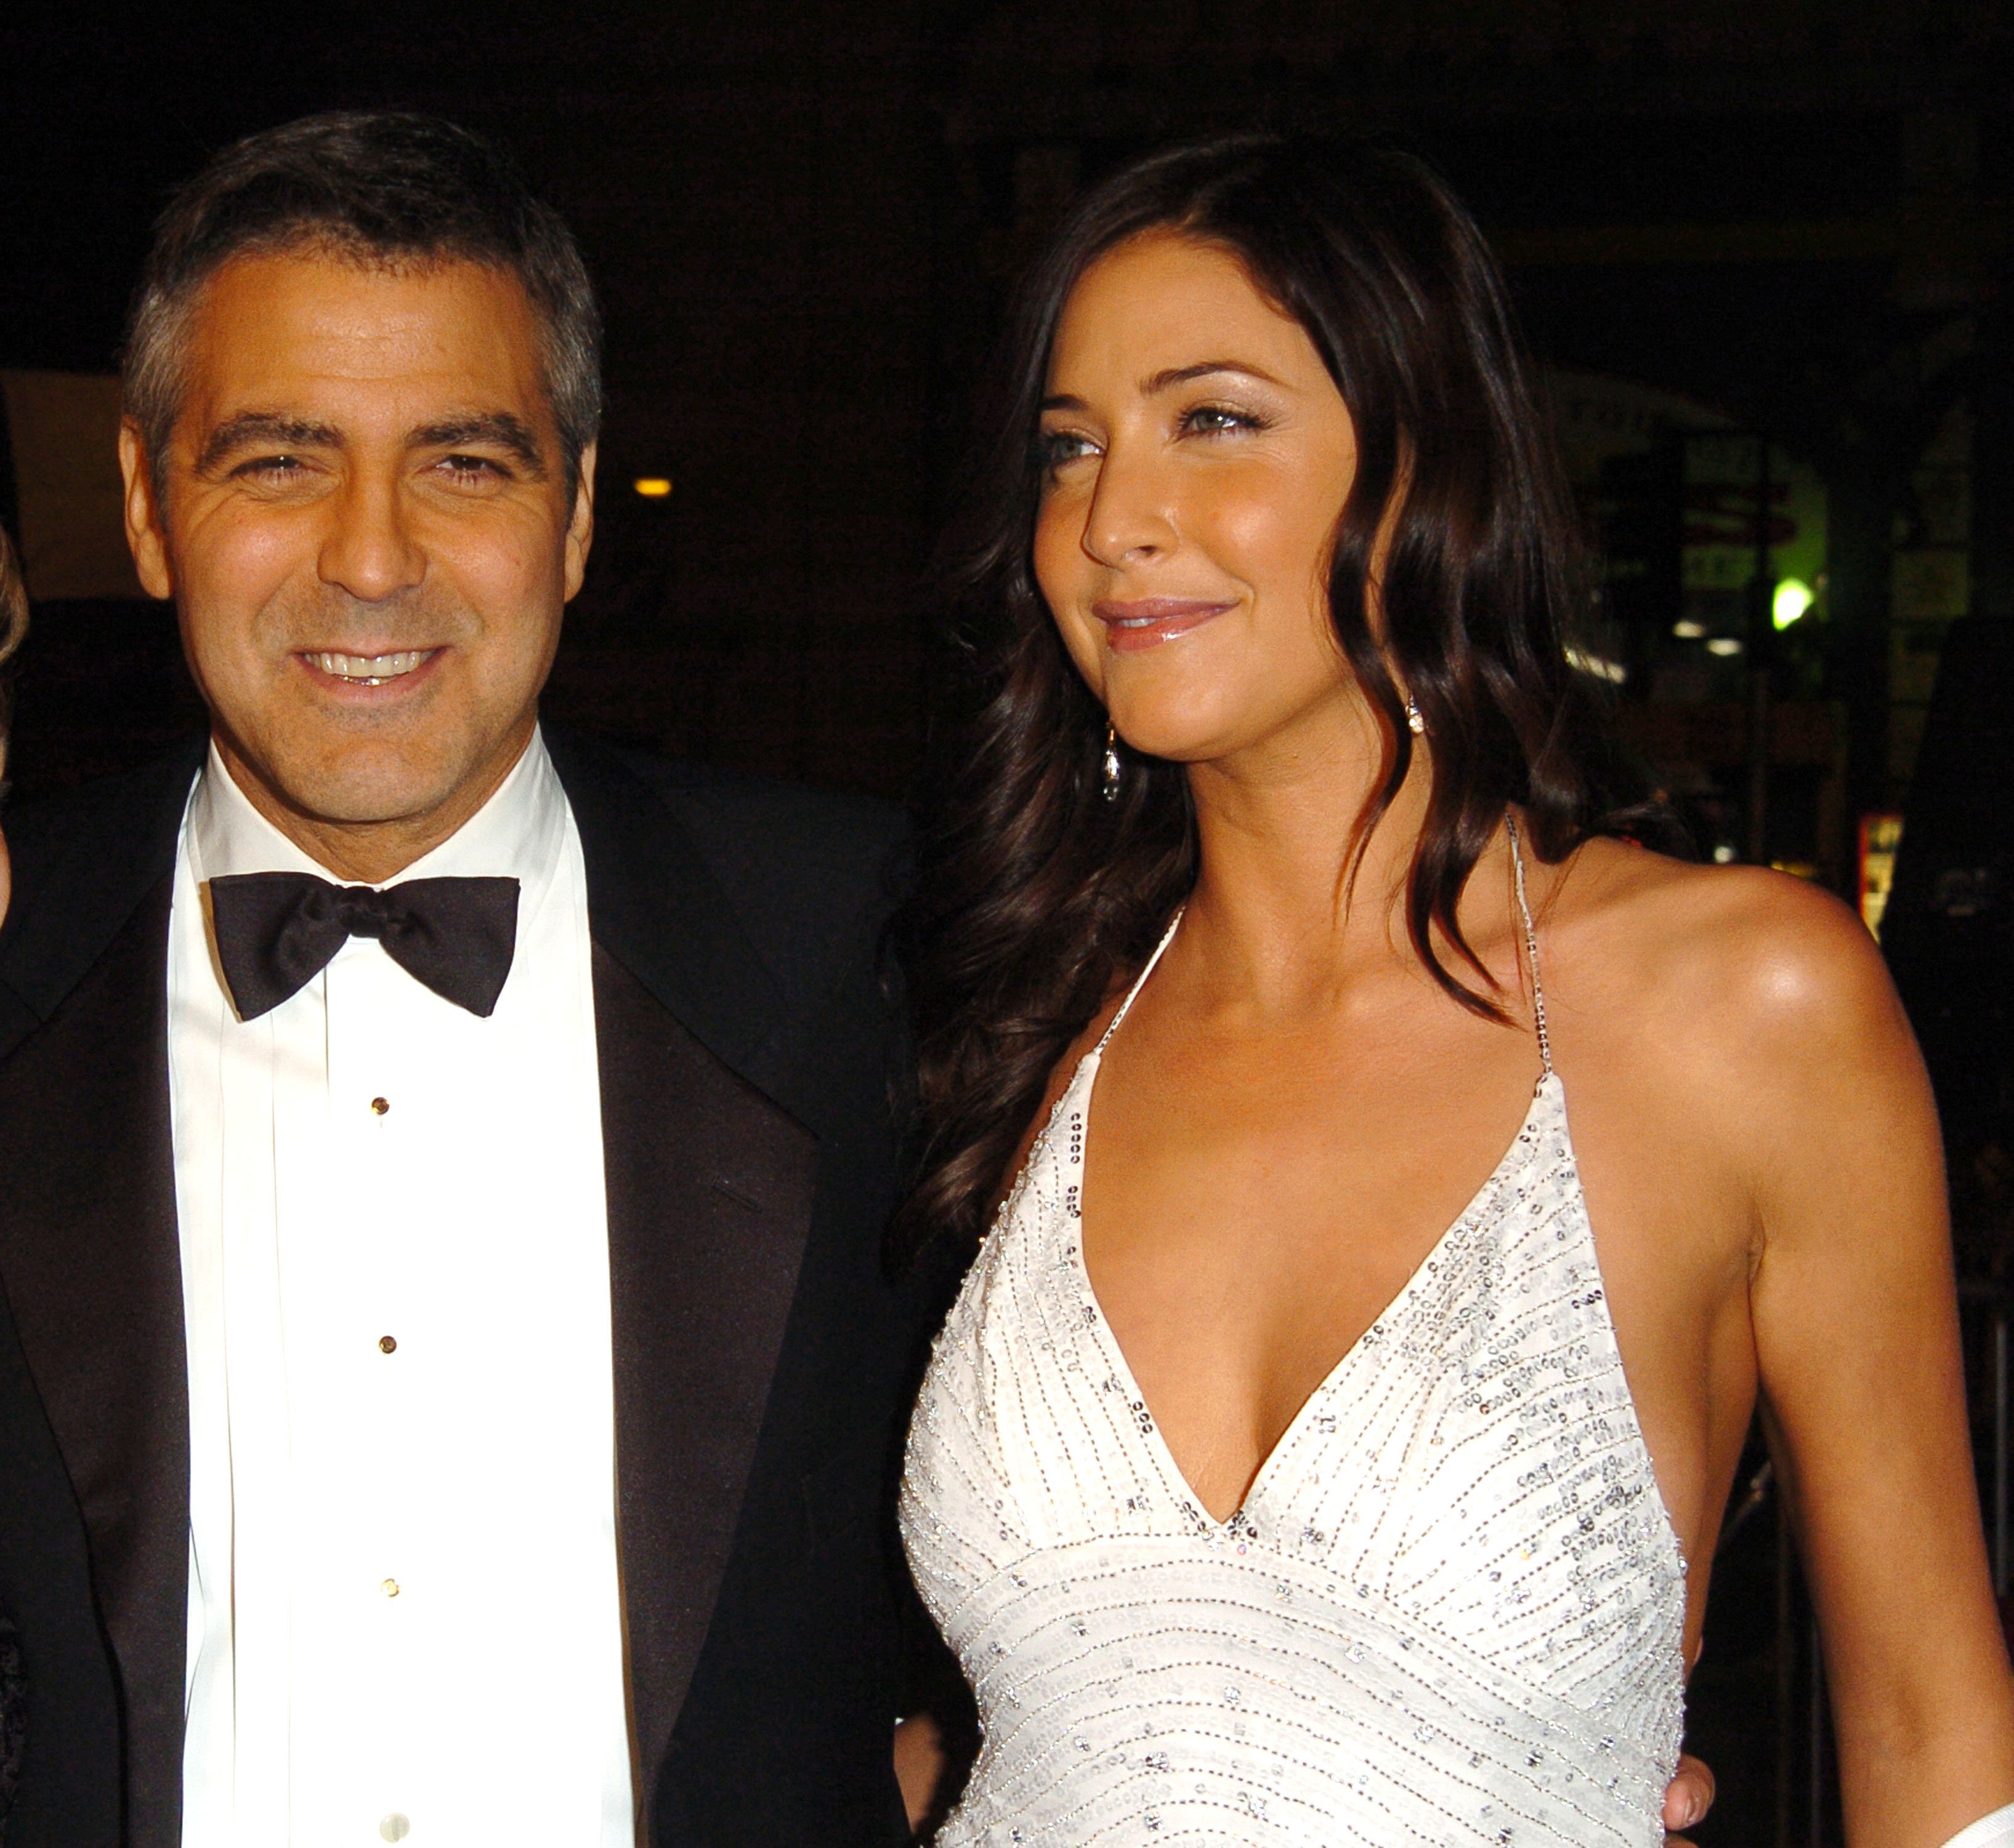 TV presenter Lisa Snowdon and George Clooney during "Ocean's Twelve" Los Angeles premiere at Grauman's Chinese in Hollywood, California. / Source: Getty Images